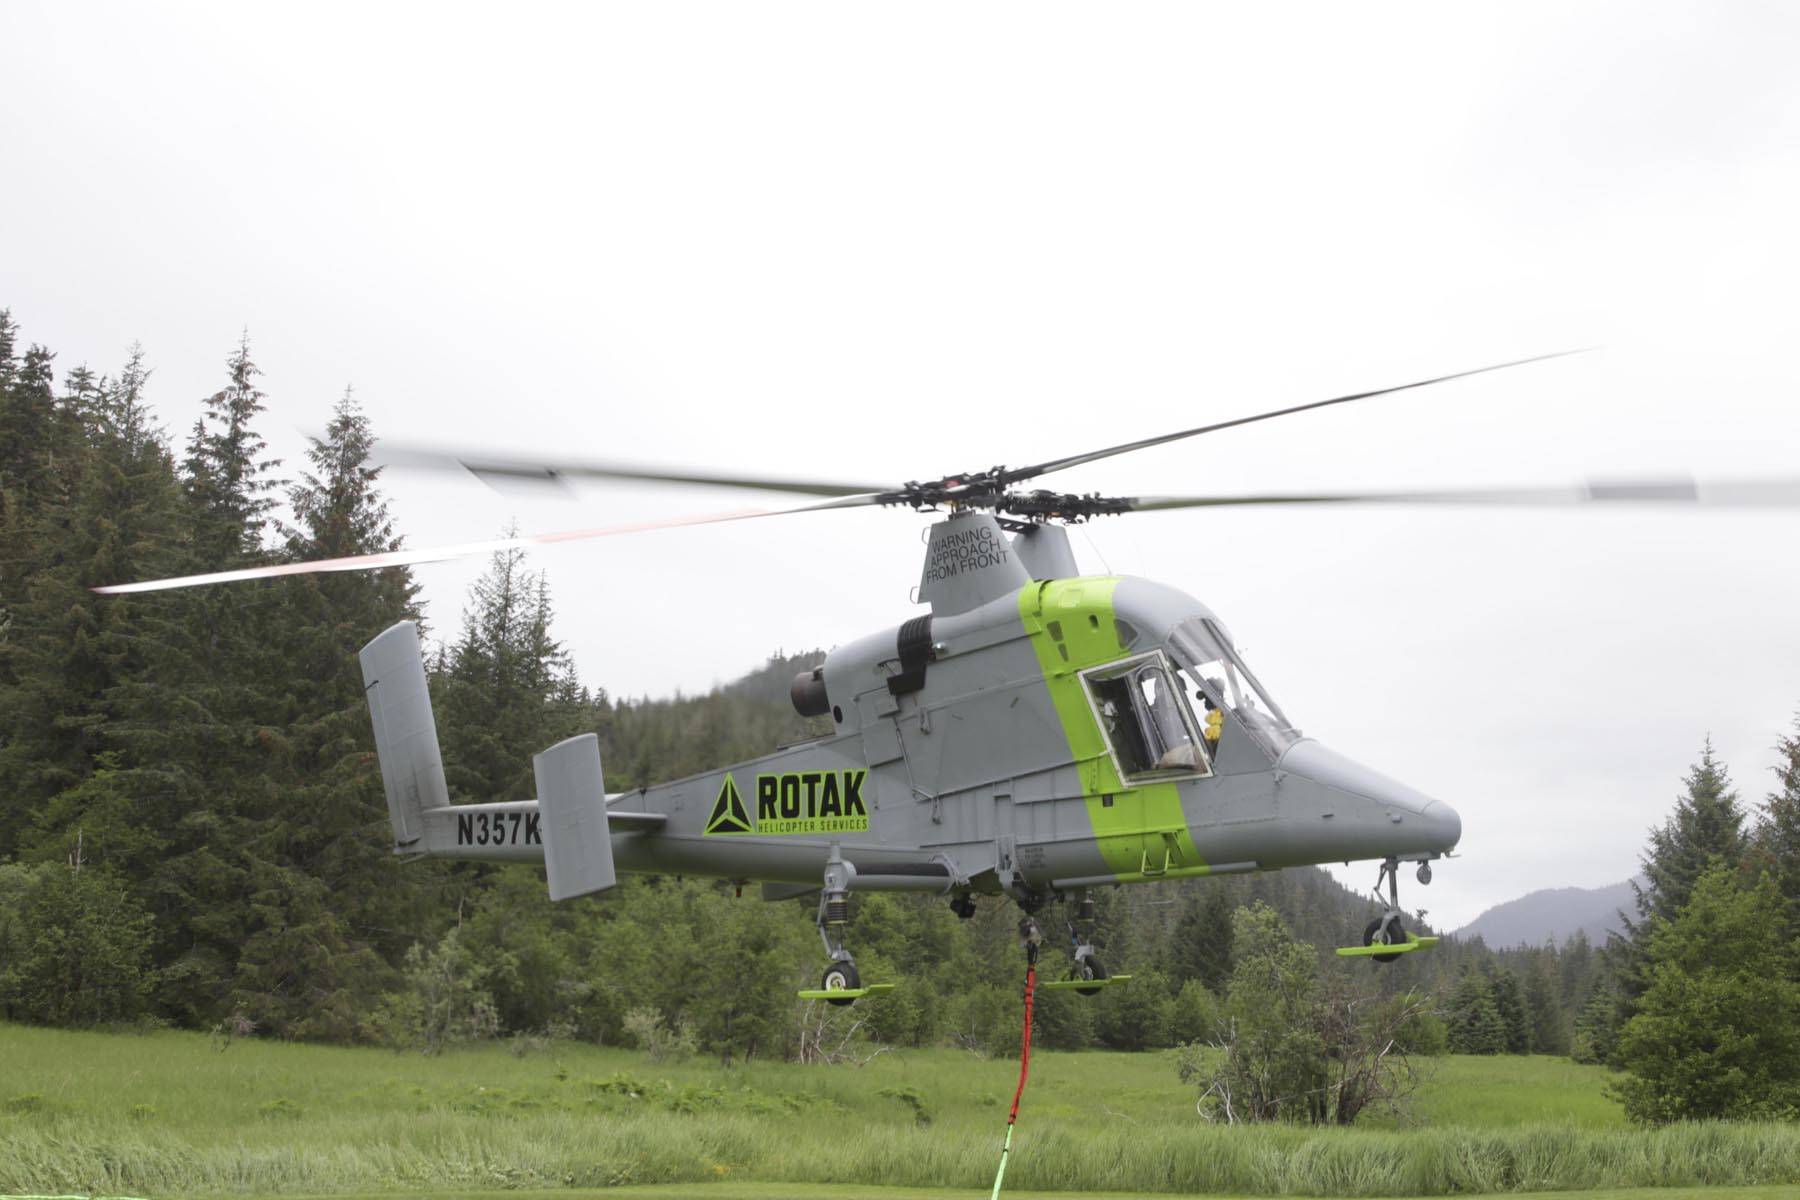 Trail Mix Inc. contracted with ROTAK Helicopter Services to provide a K-Max heavy lift helicopter to slingload dozens of tons of gravels for new construction on the Horse Tram Trail on Tuesday, June 23, 2020. (Michael S. Lockett | Juneau Empire)